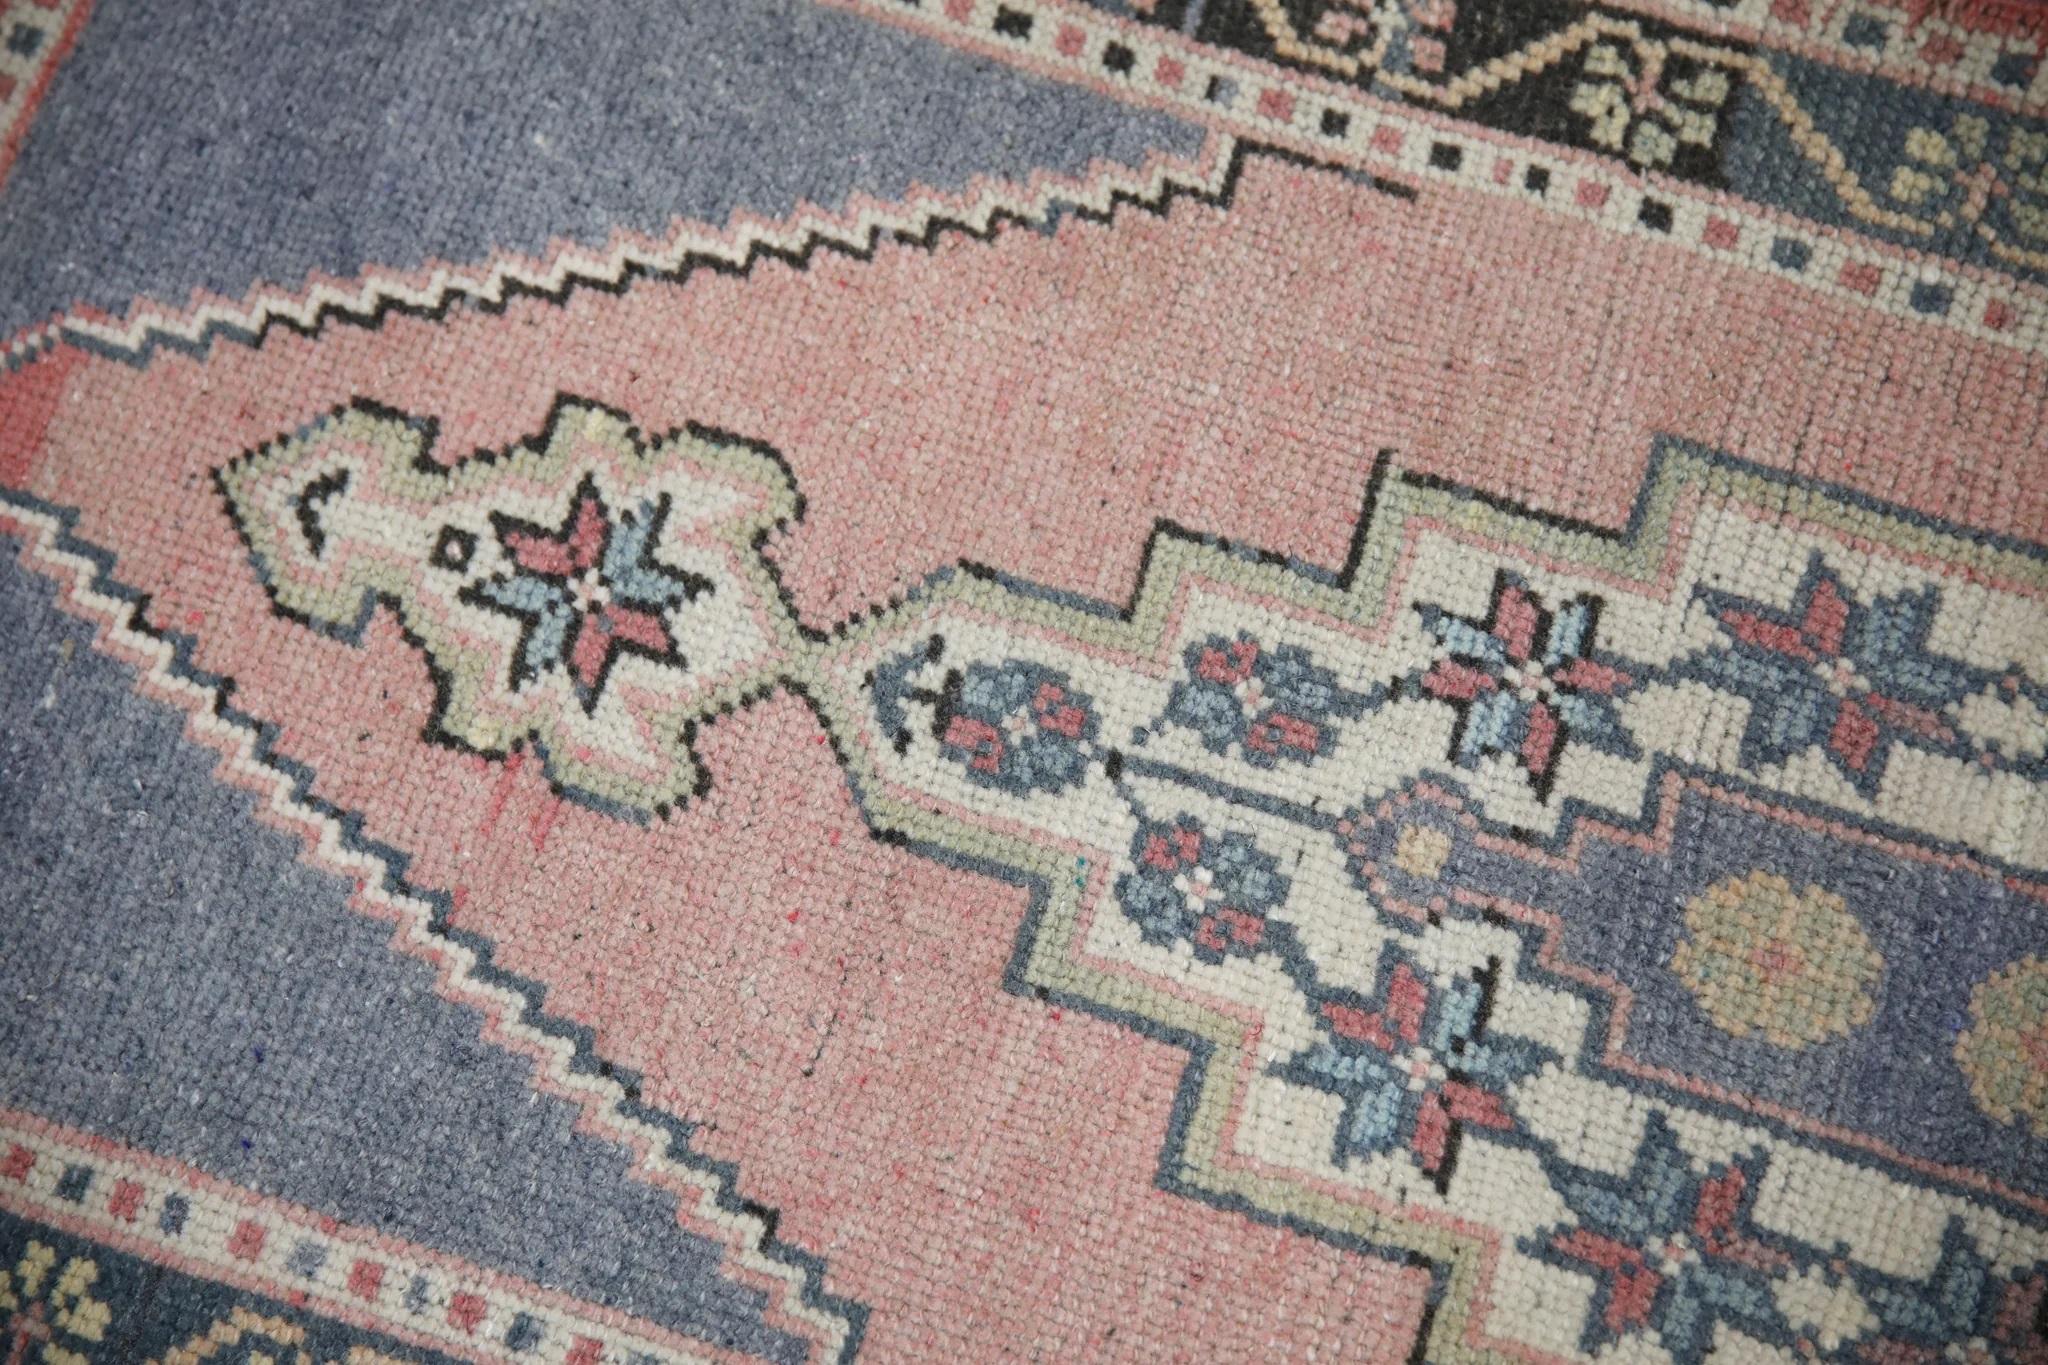 Introducing our exquisite vintage mini Turkish rug, expertly crafted by skilled artisans using traditional techniques that have been perfected over centuries. Made entirely from 100% handwoven wool, this rug boasts a soft and durable texture that